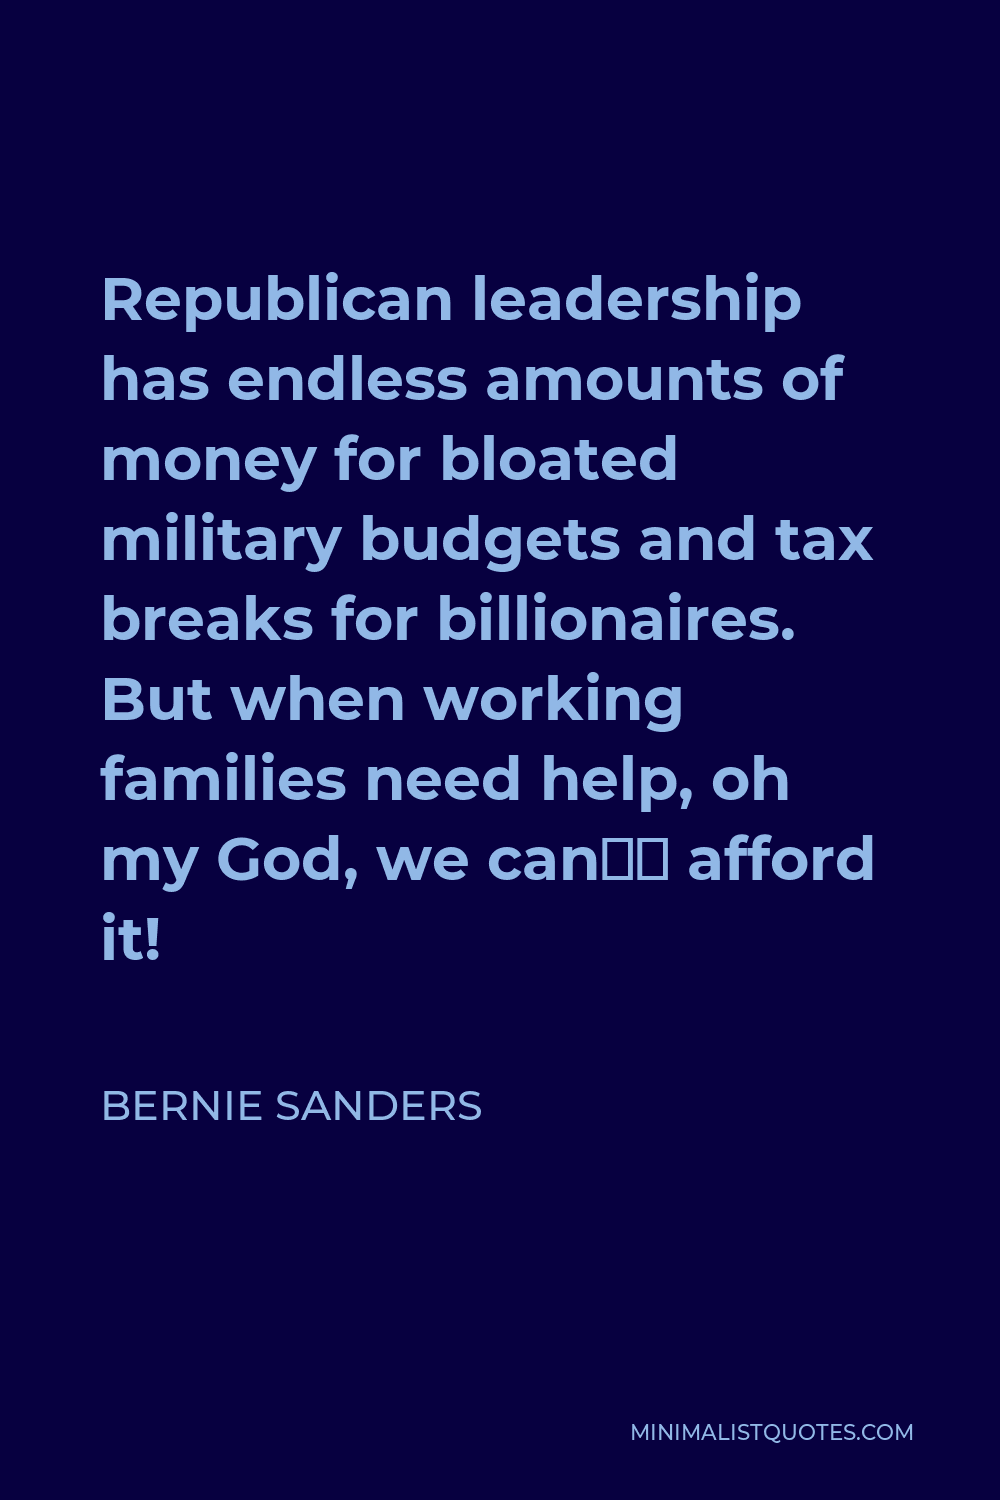 Bernie Sanders Quote - Republican leadership has endless amounts of money for bloated military budgets and tax breaks for billionaires. But when working families need help, oh my God, we can’t afford it!